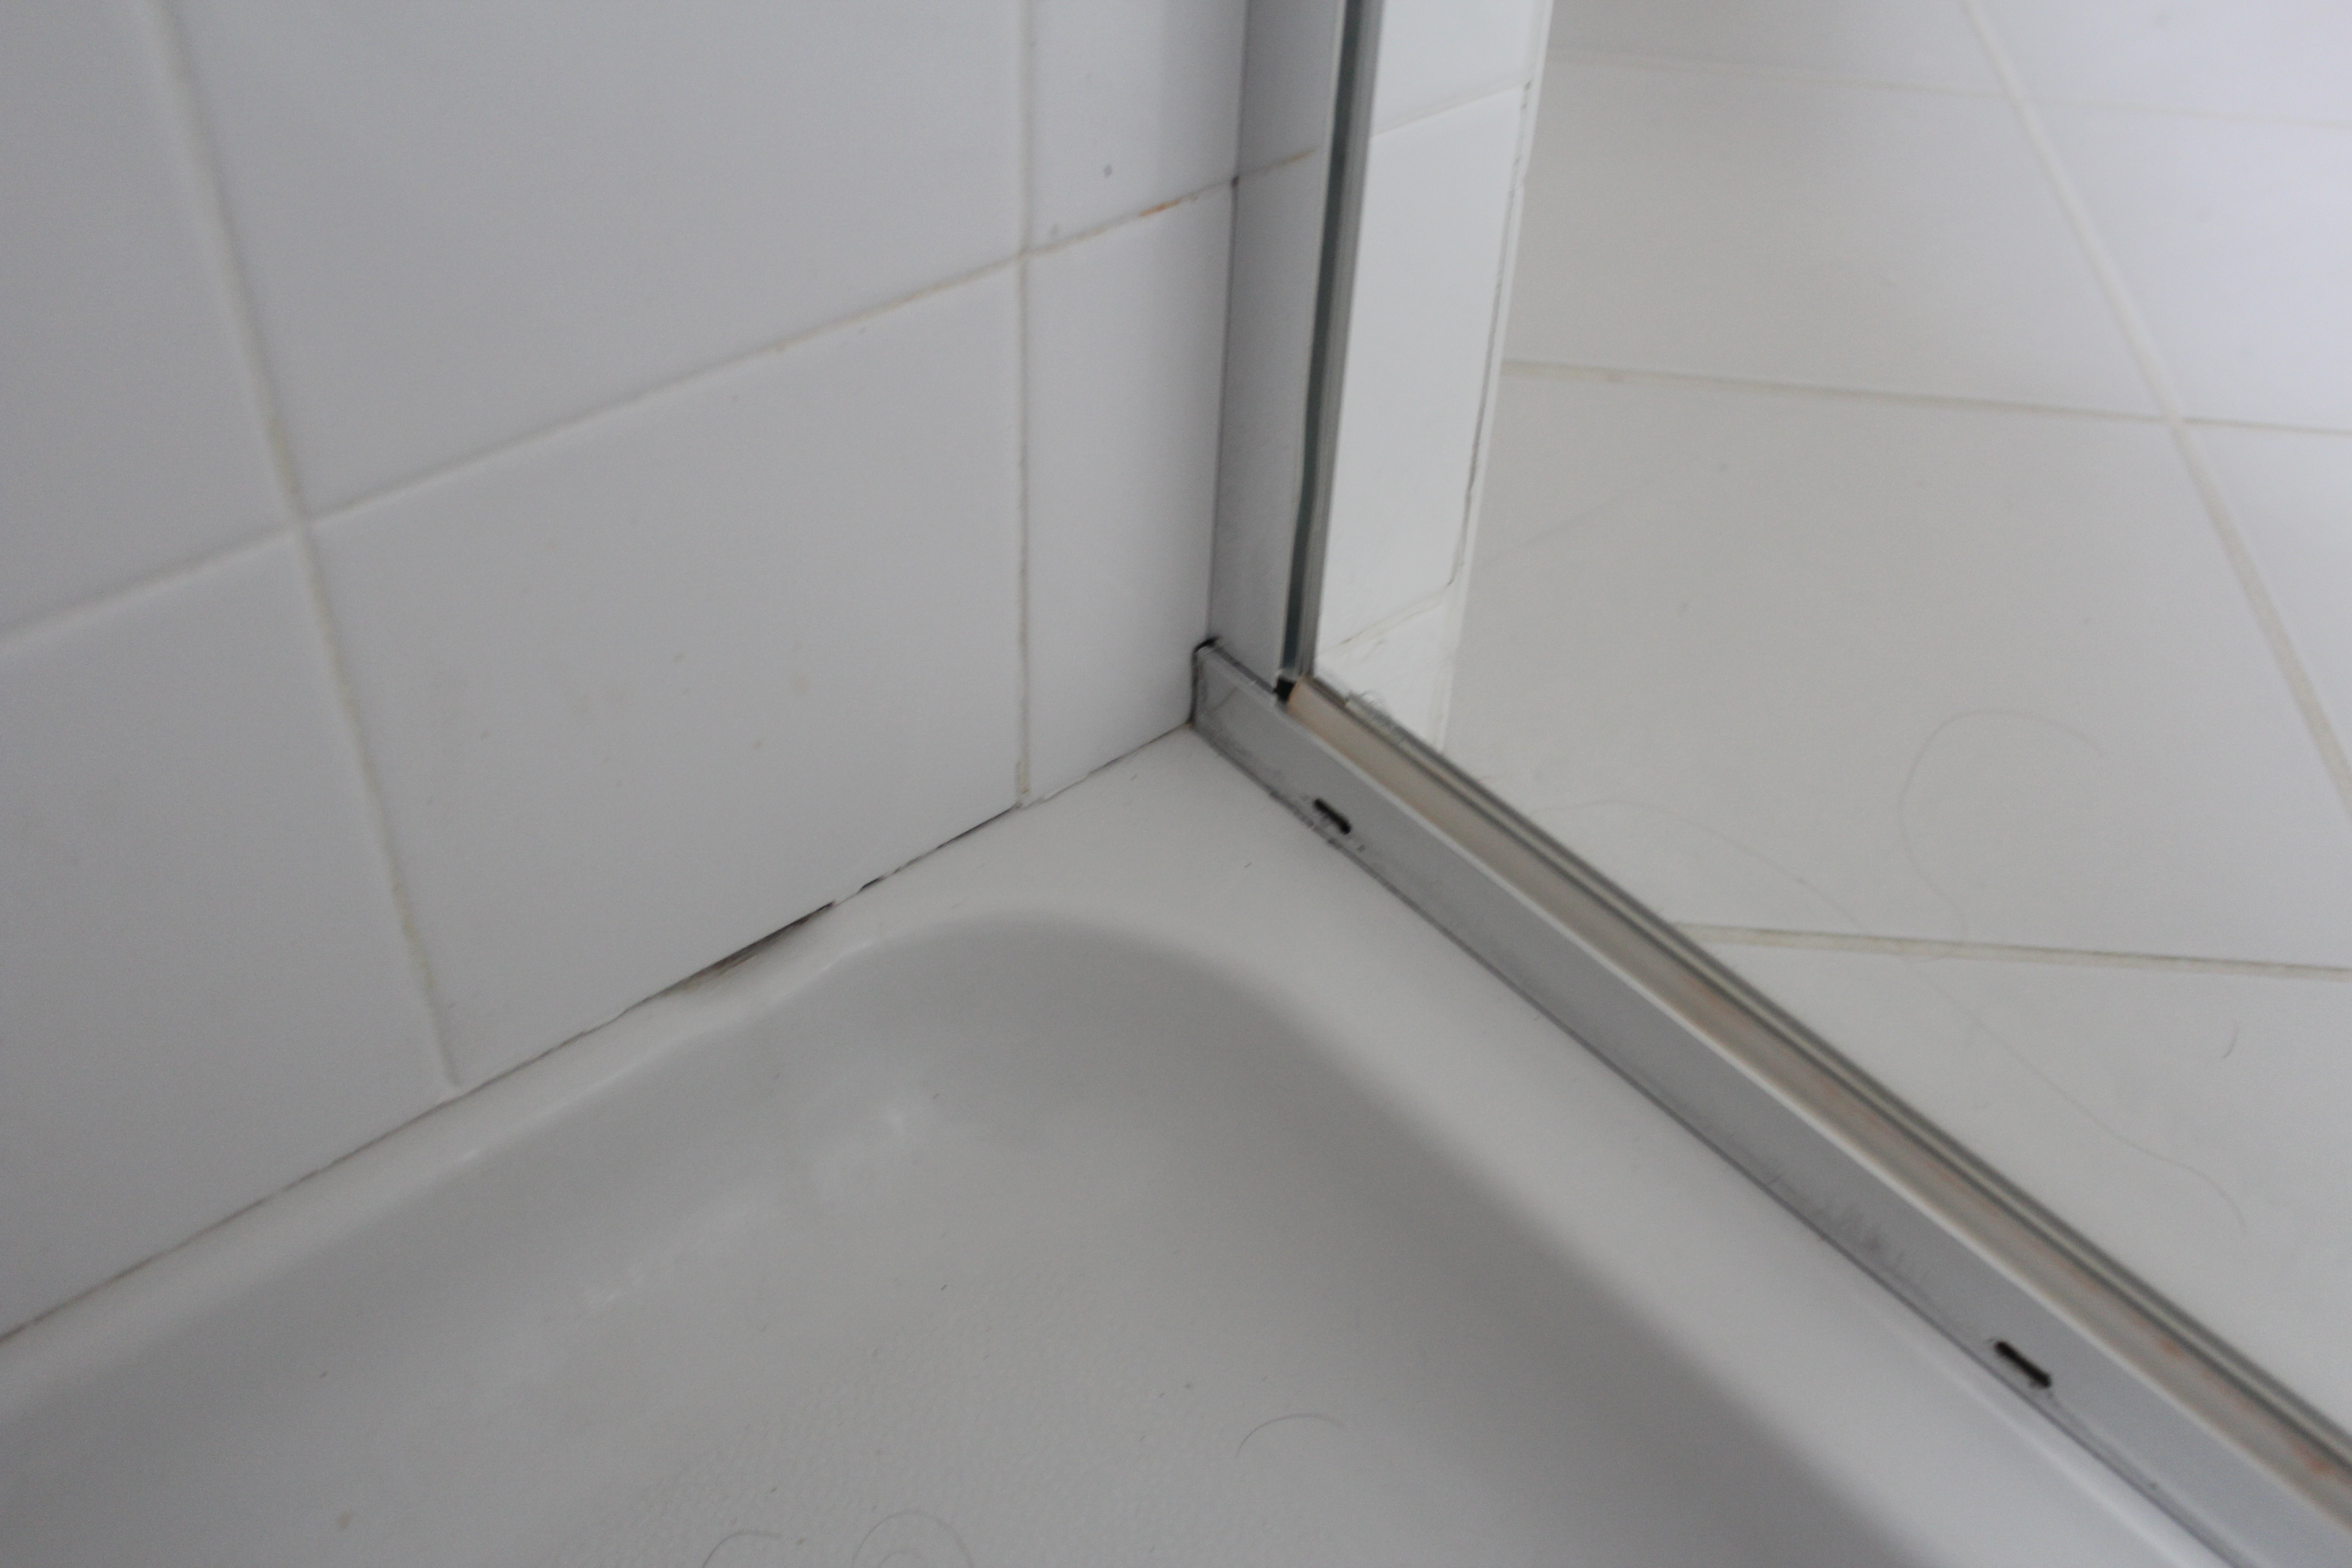 Our Home From Scratch, How To Remove Mildew Stains From Bathtub Caulk